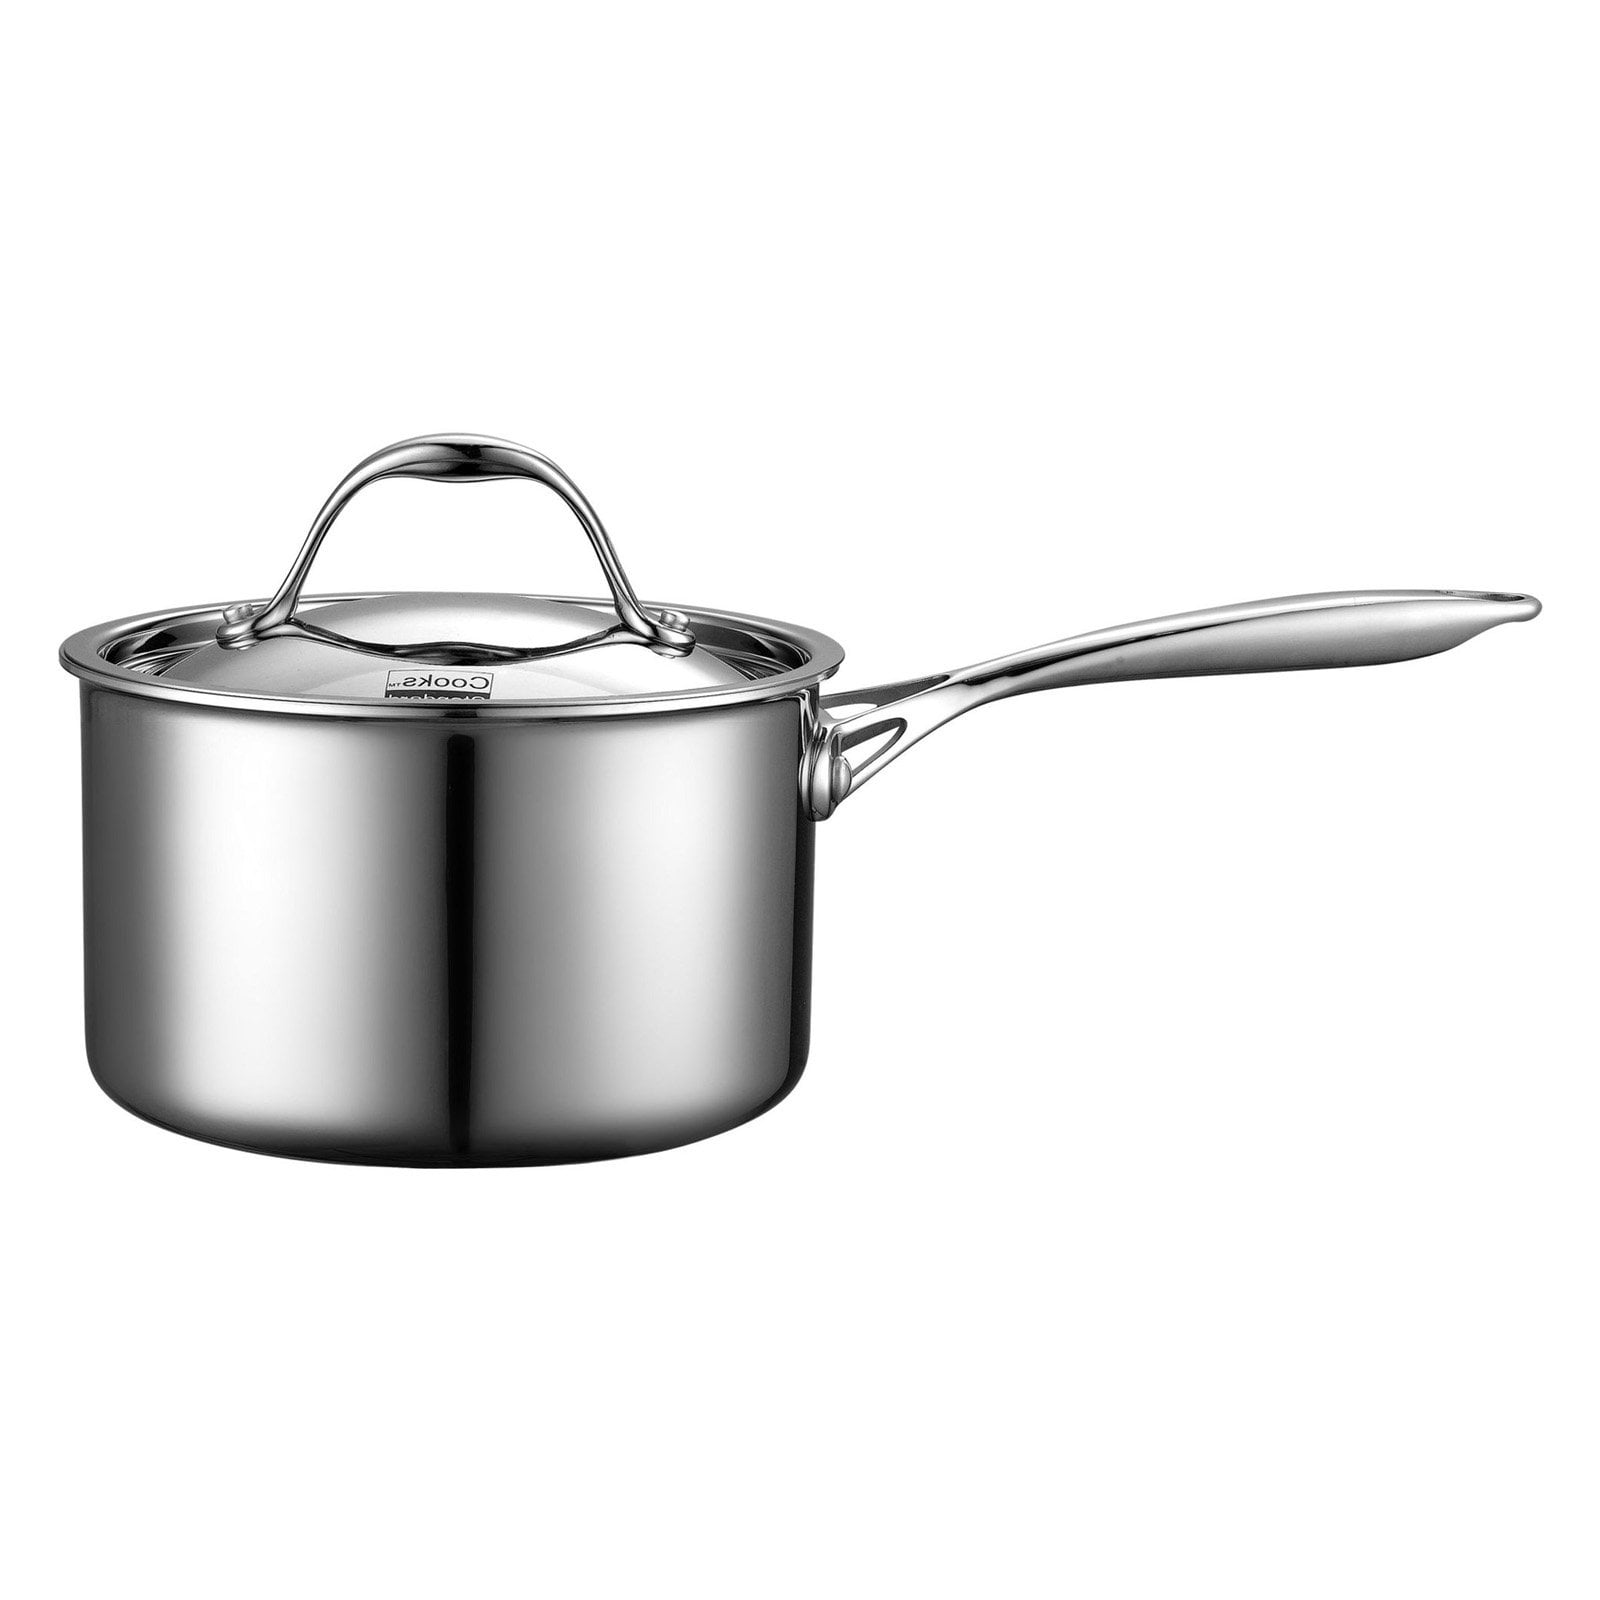 APLSS 3 Quart 18/10 Tri-Ply Stainless Steel Saucepan with Single long  handle and Glass Lid - Food-Grade and Suitable for All Cooktops, Dishwasher  Safe